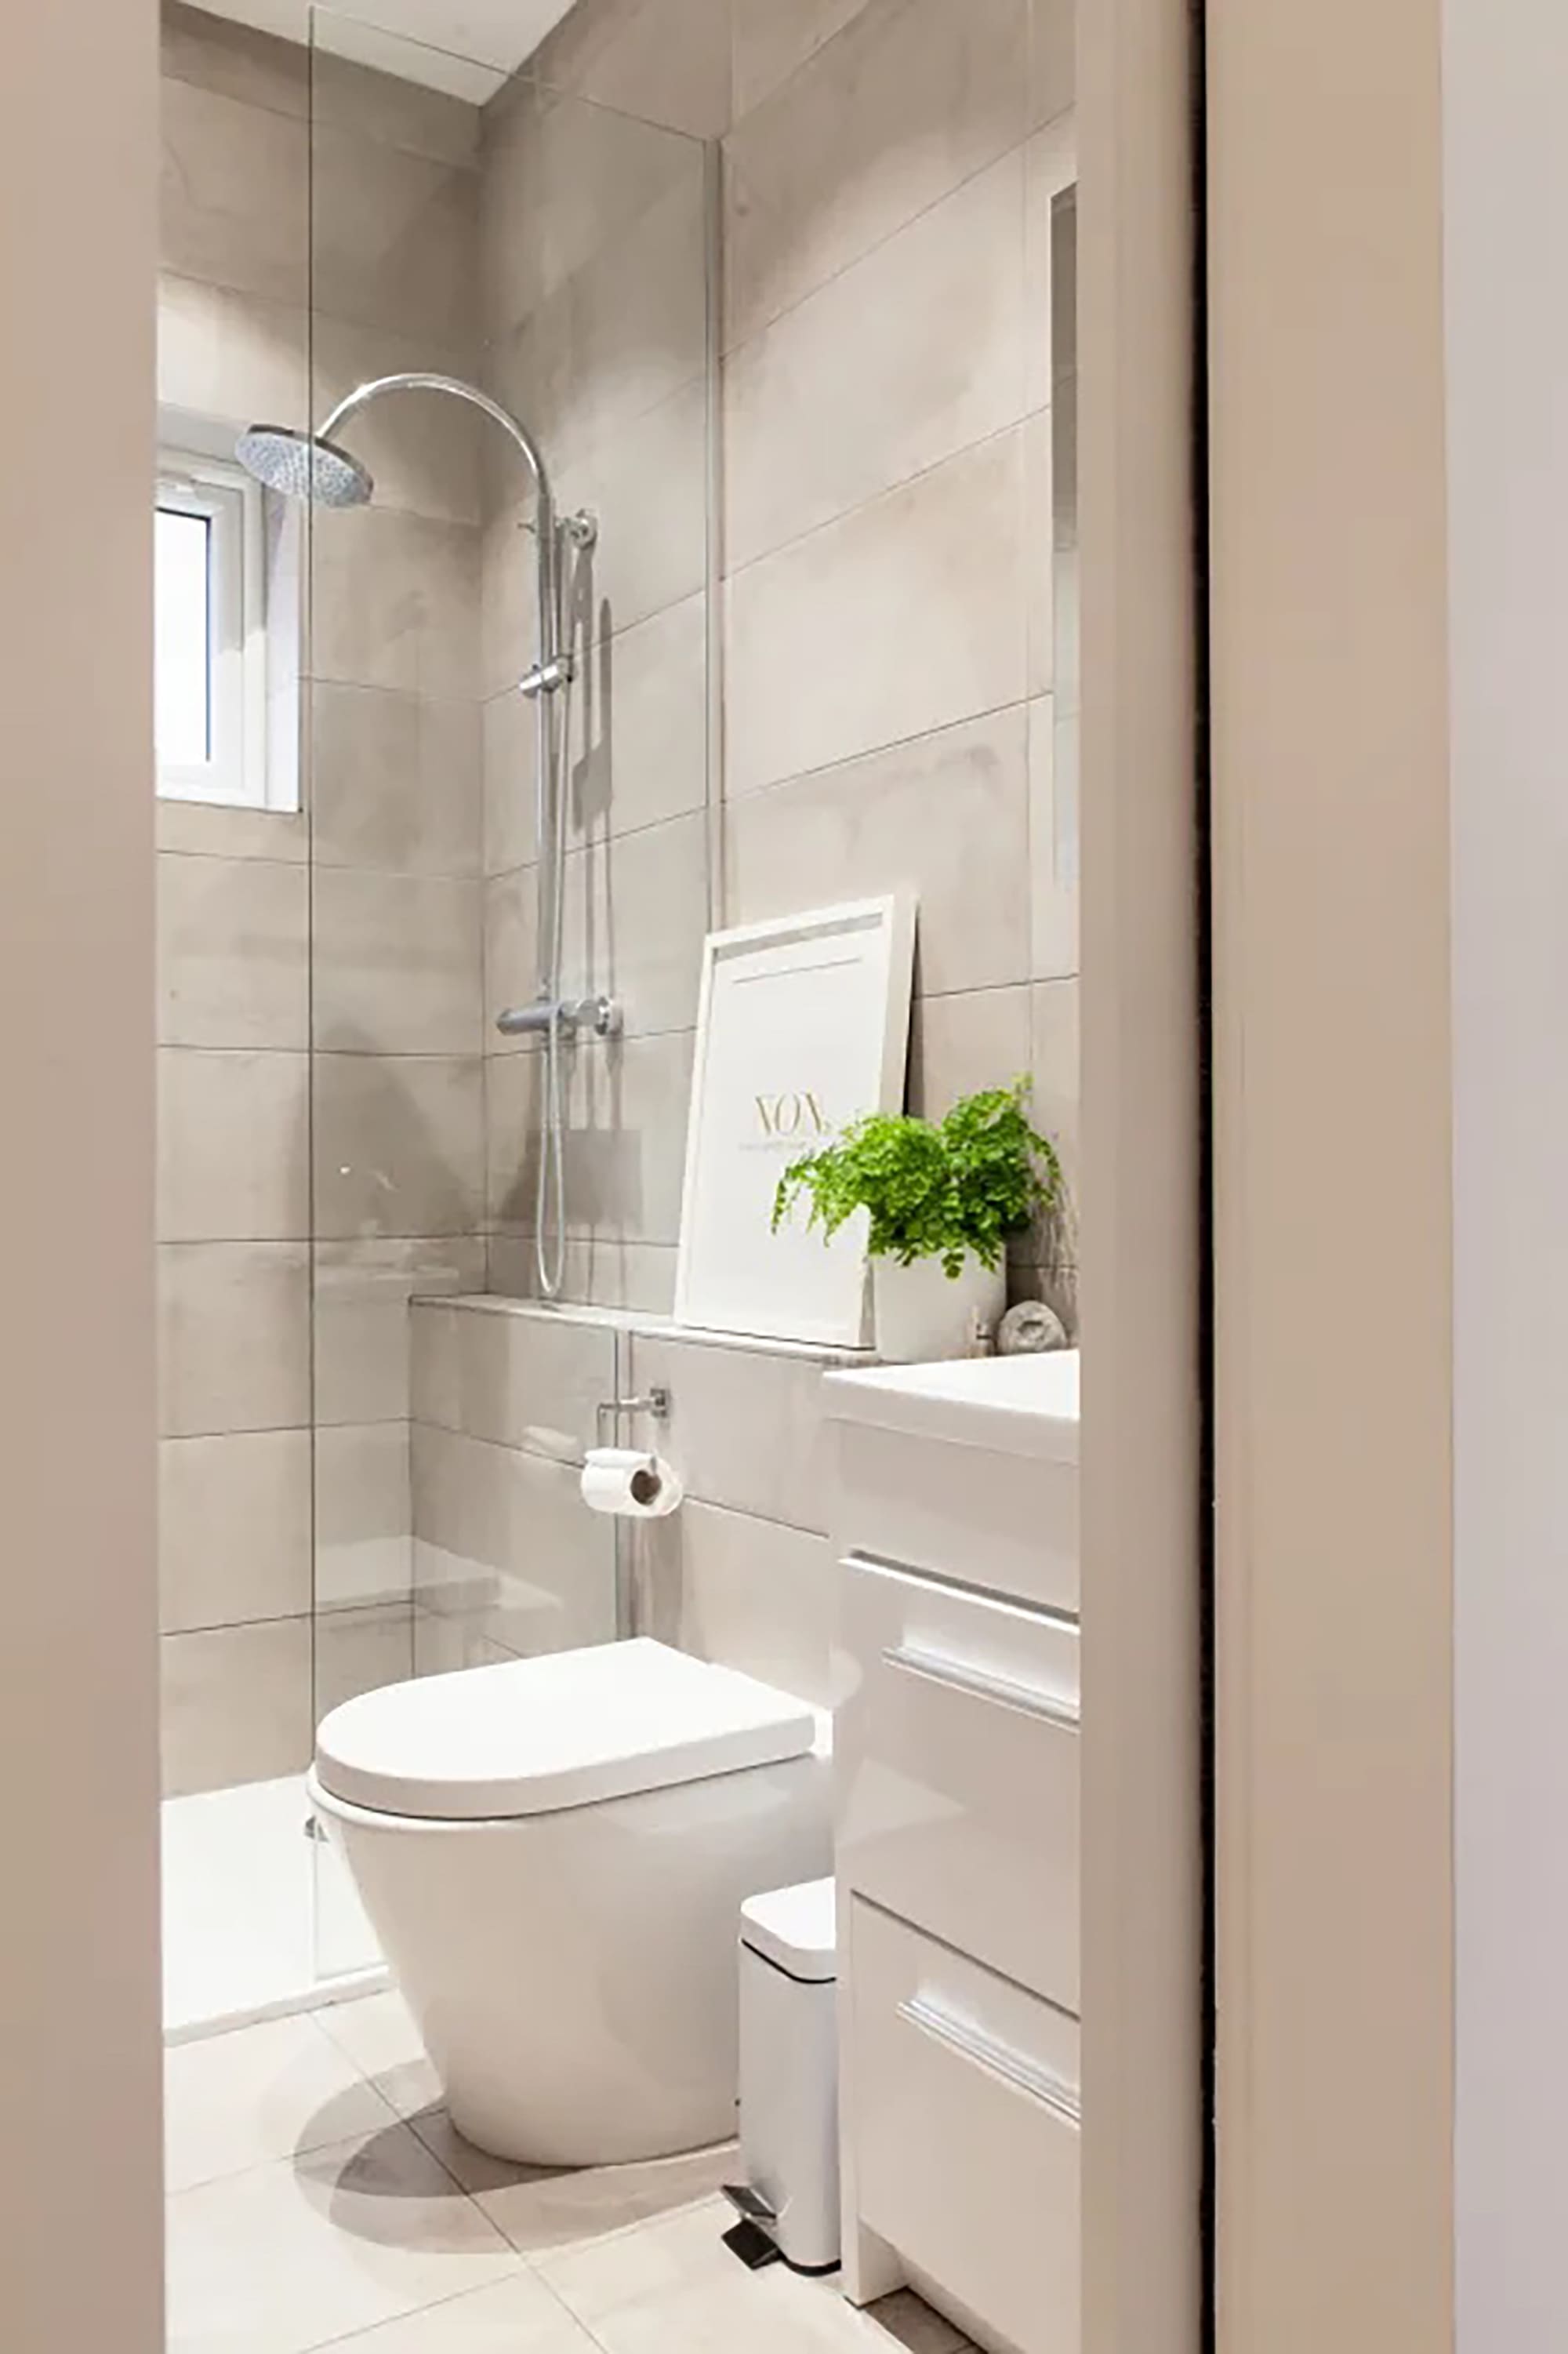 13 Walk-In Shower Ideas for Small Bathrooms